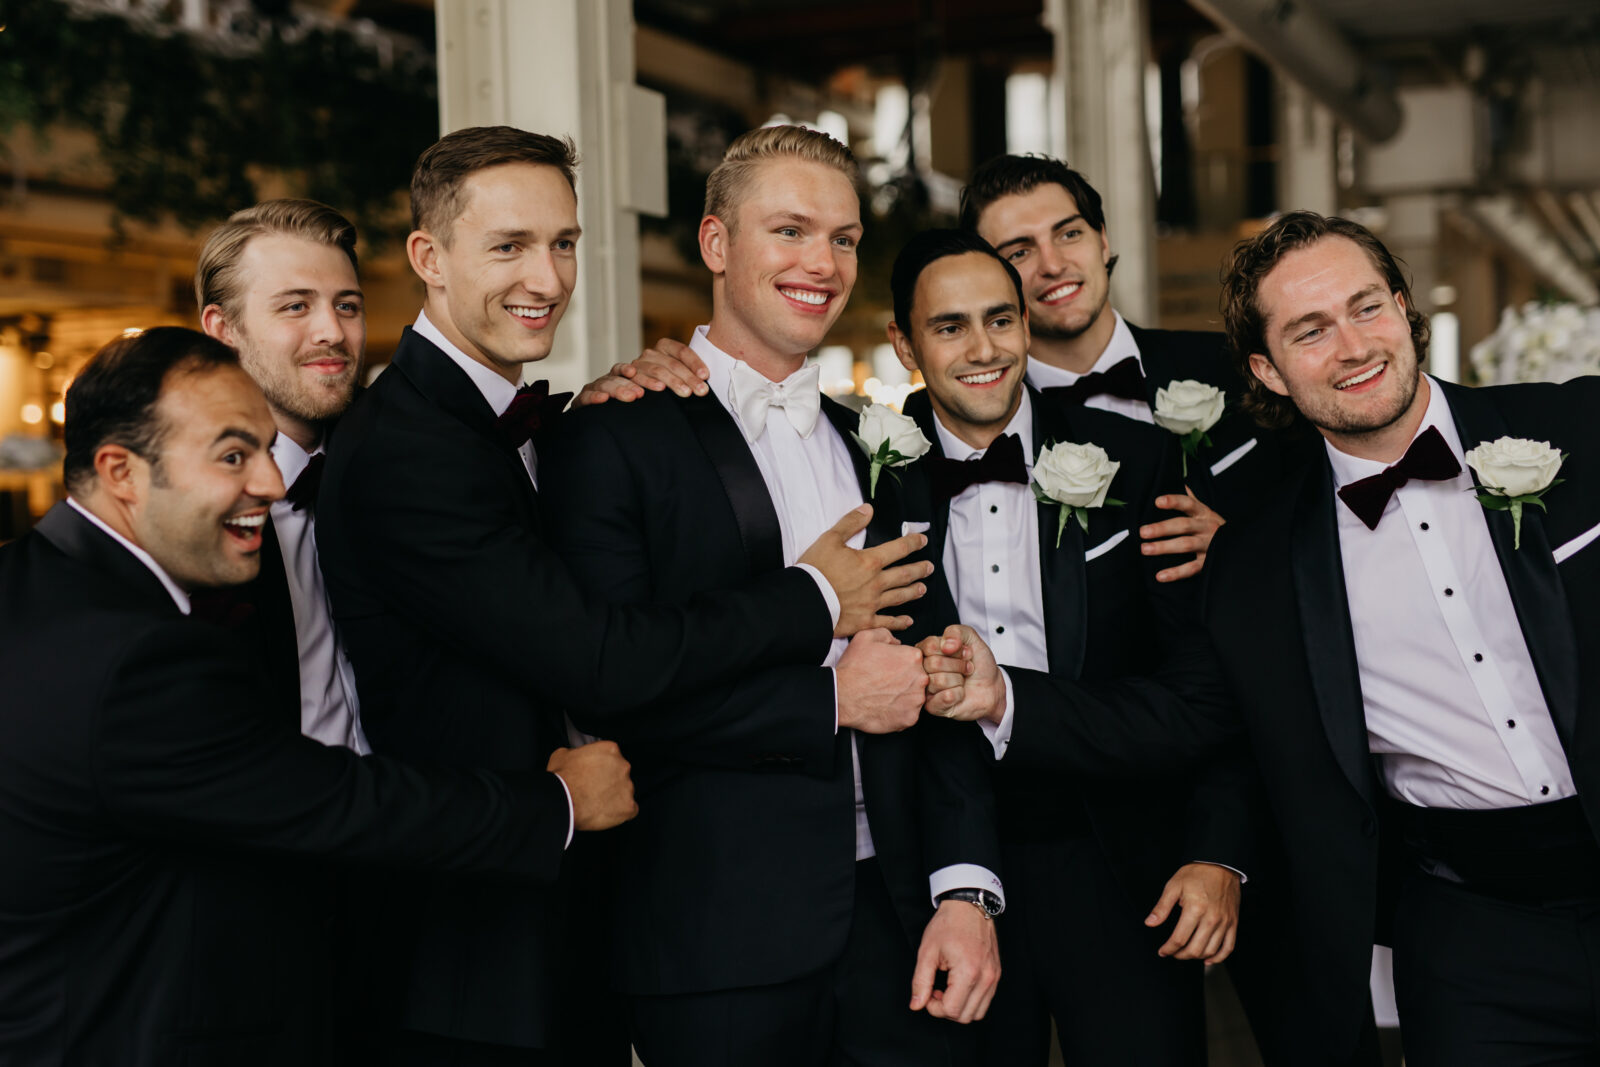 A photo of the groom and his groomsmen